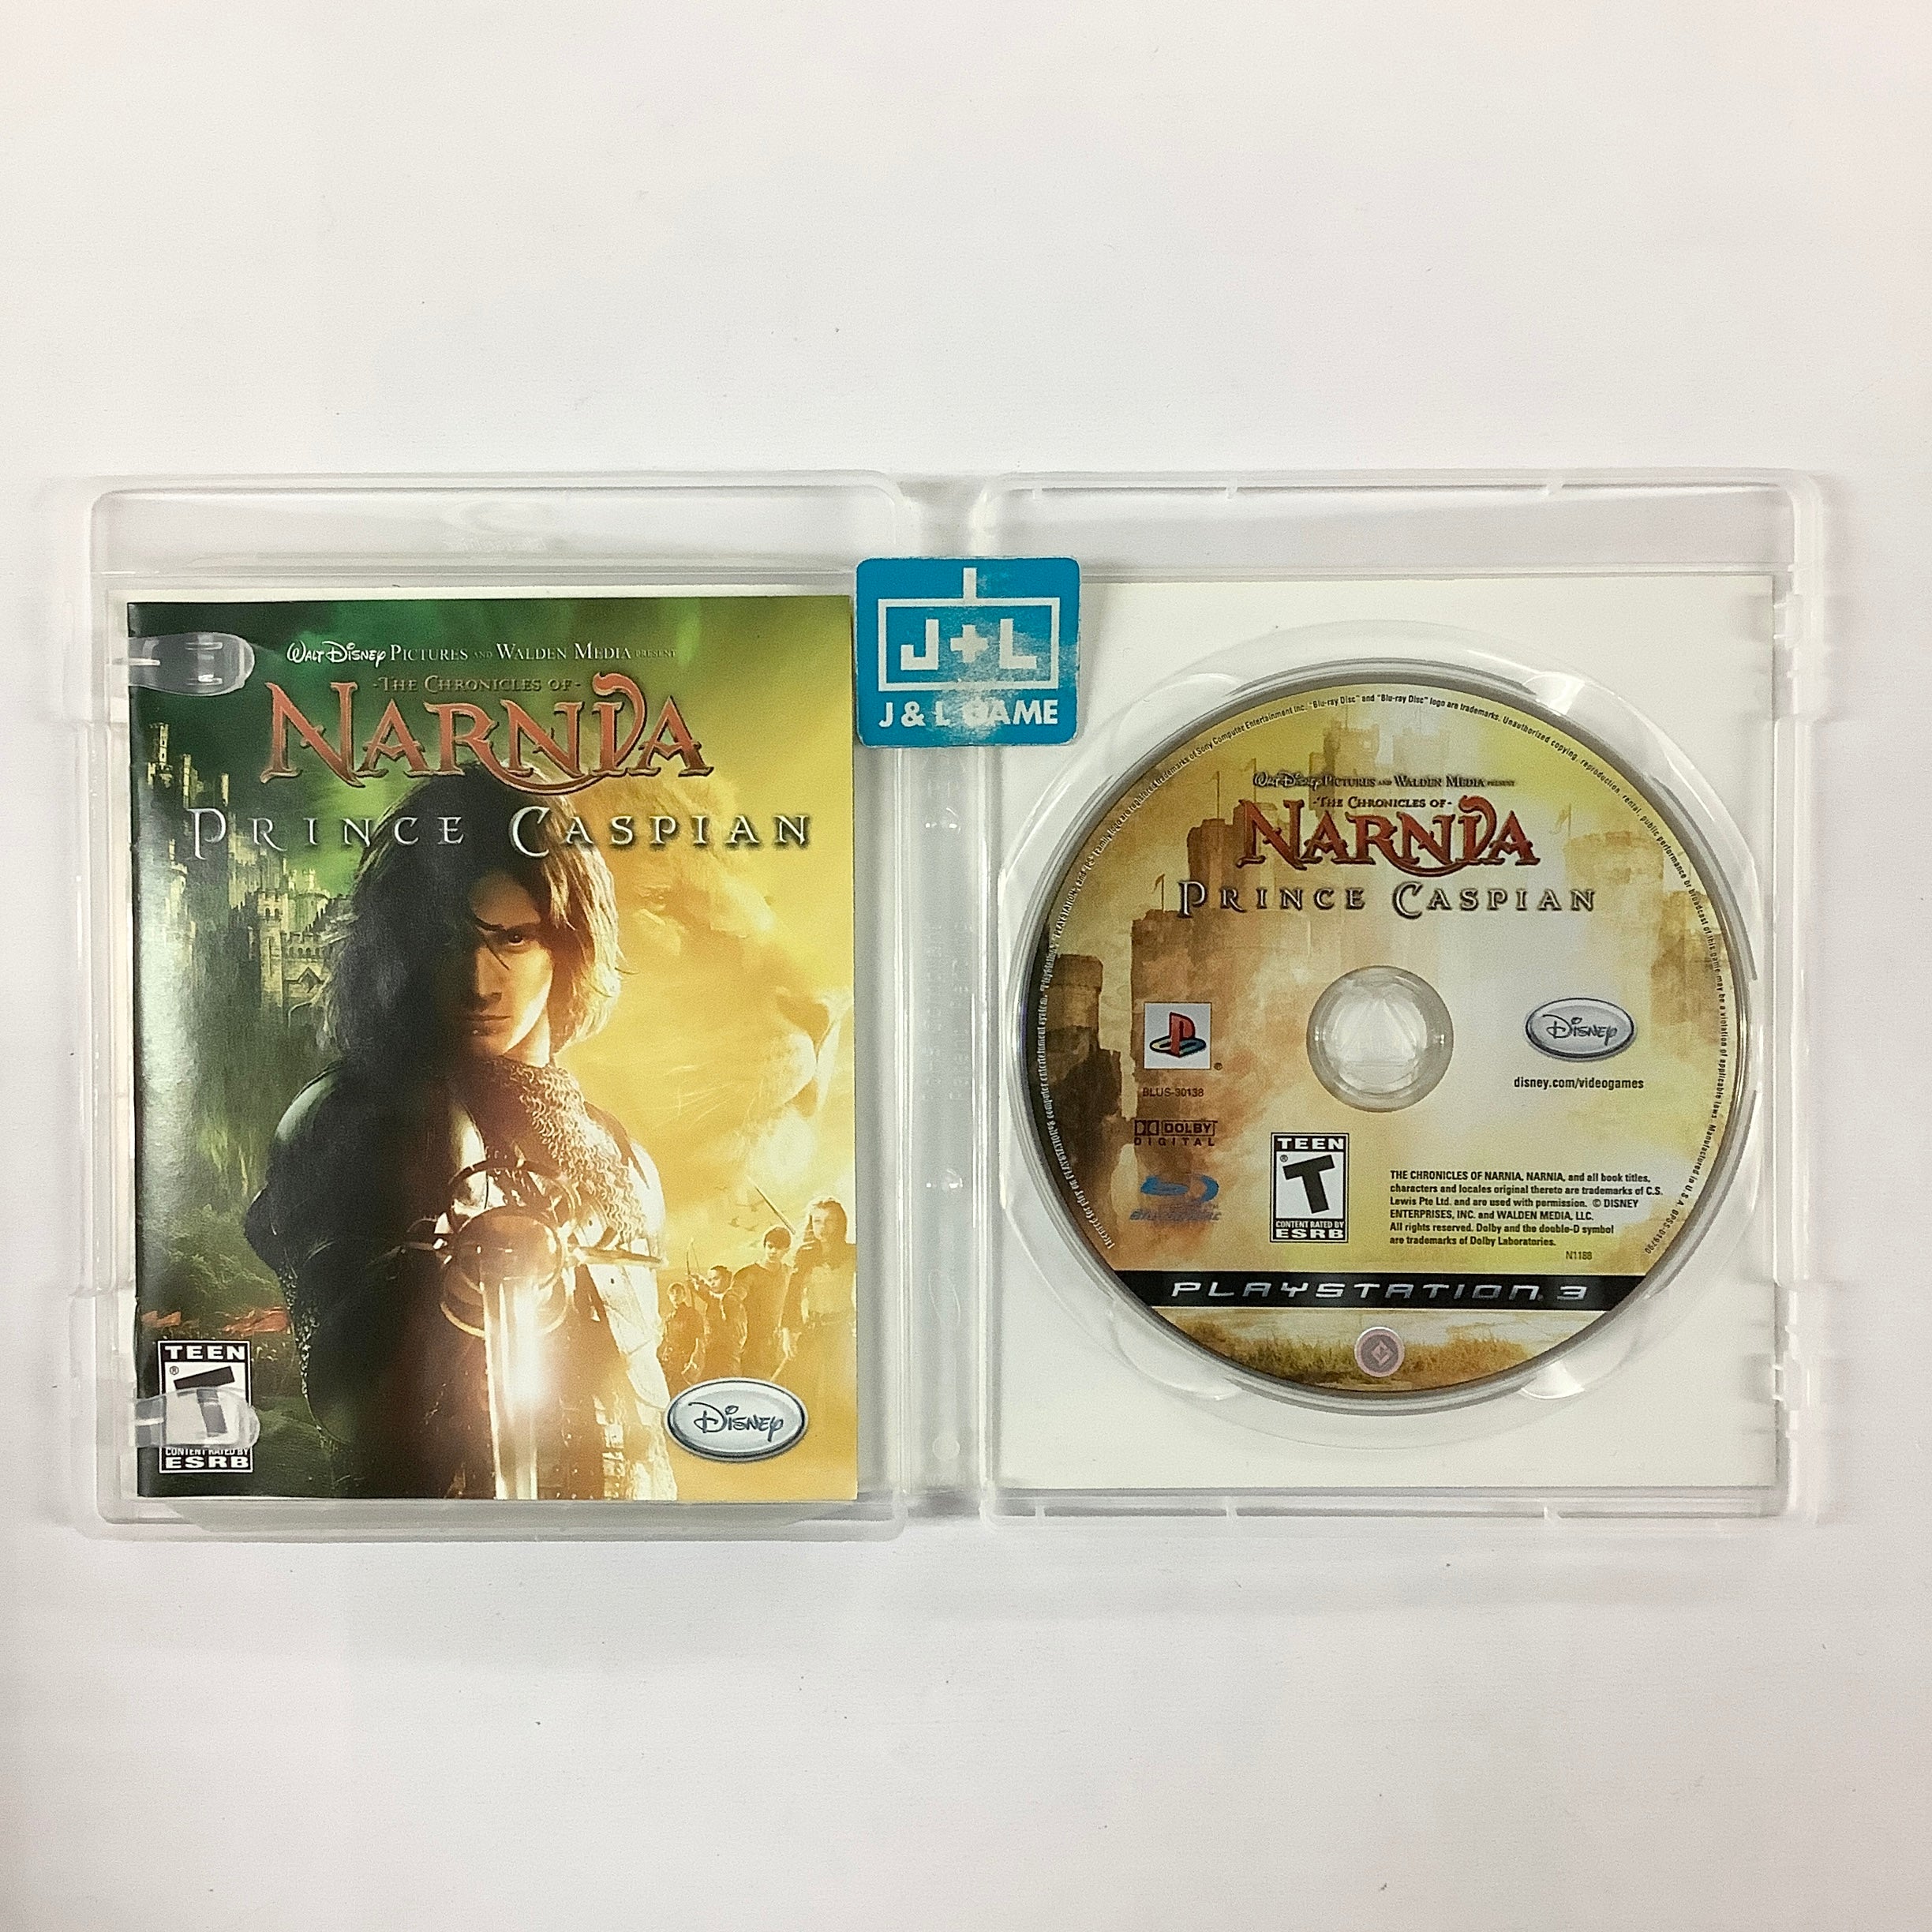 The Chronicles of Narnia: Prince Caspian - (PS3) PlayStation 3 [Pre-Owned] Video Games Disney Interactive Studios   